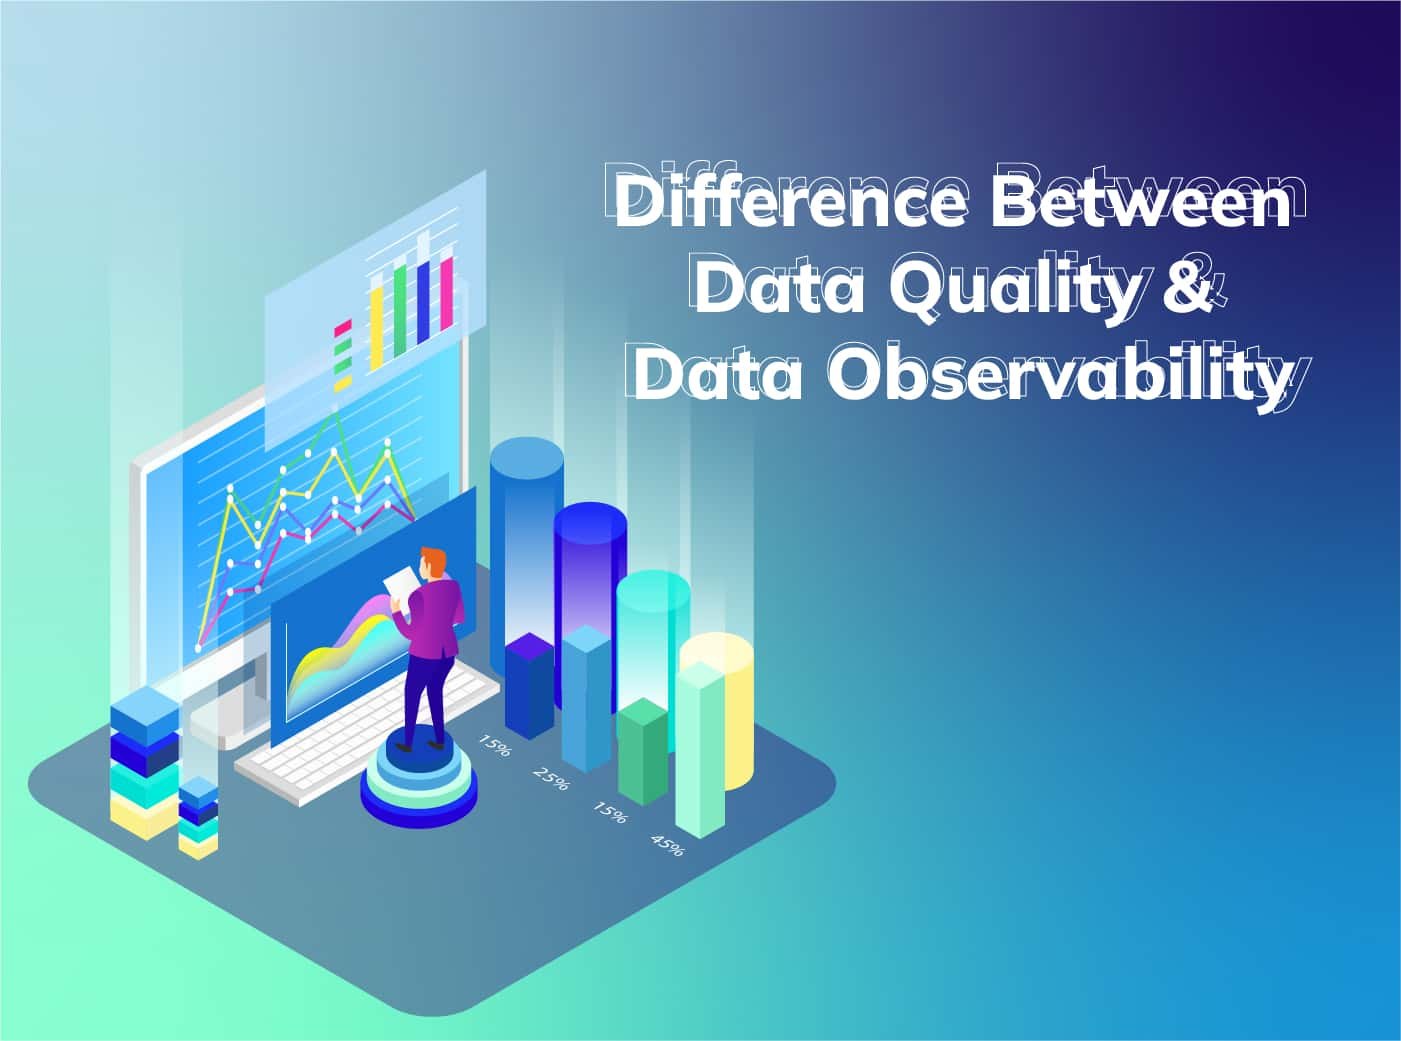 Unfolding the difference between Data Observability and Data Quality